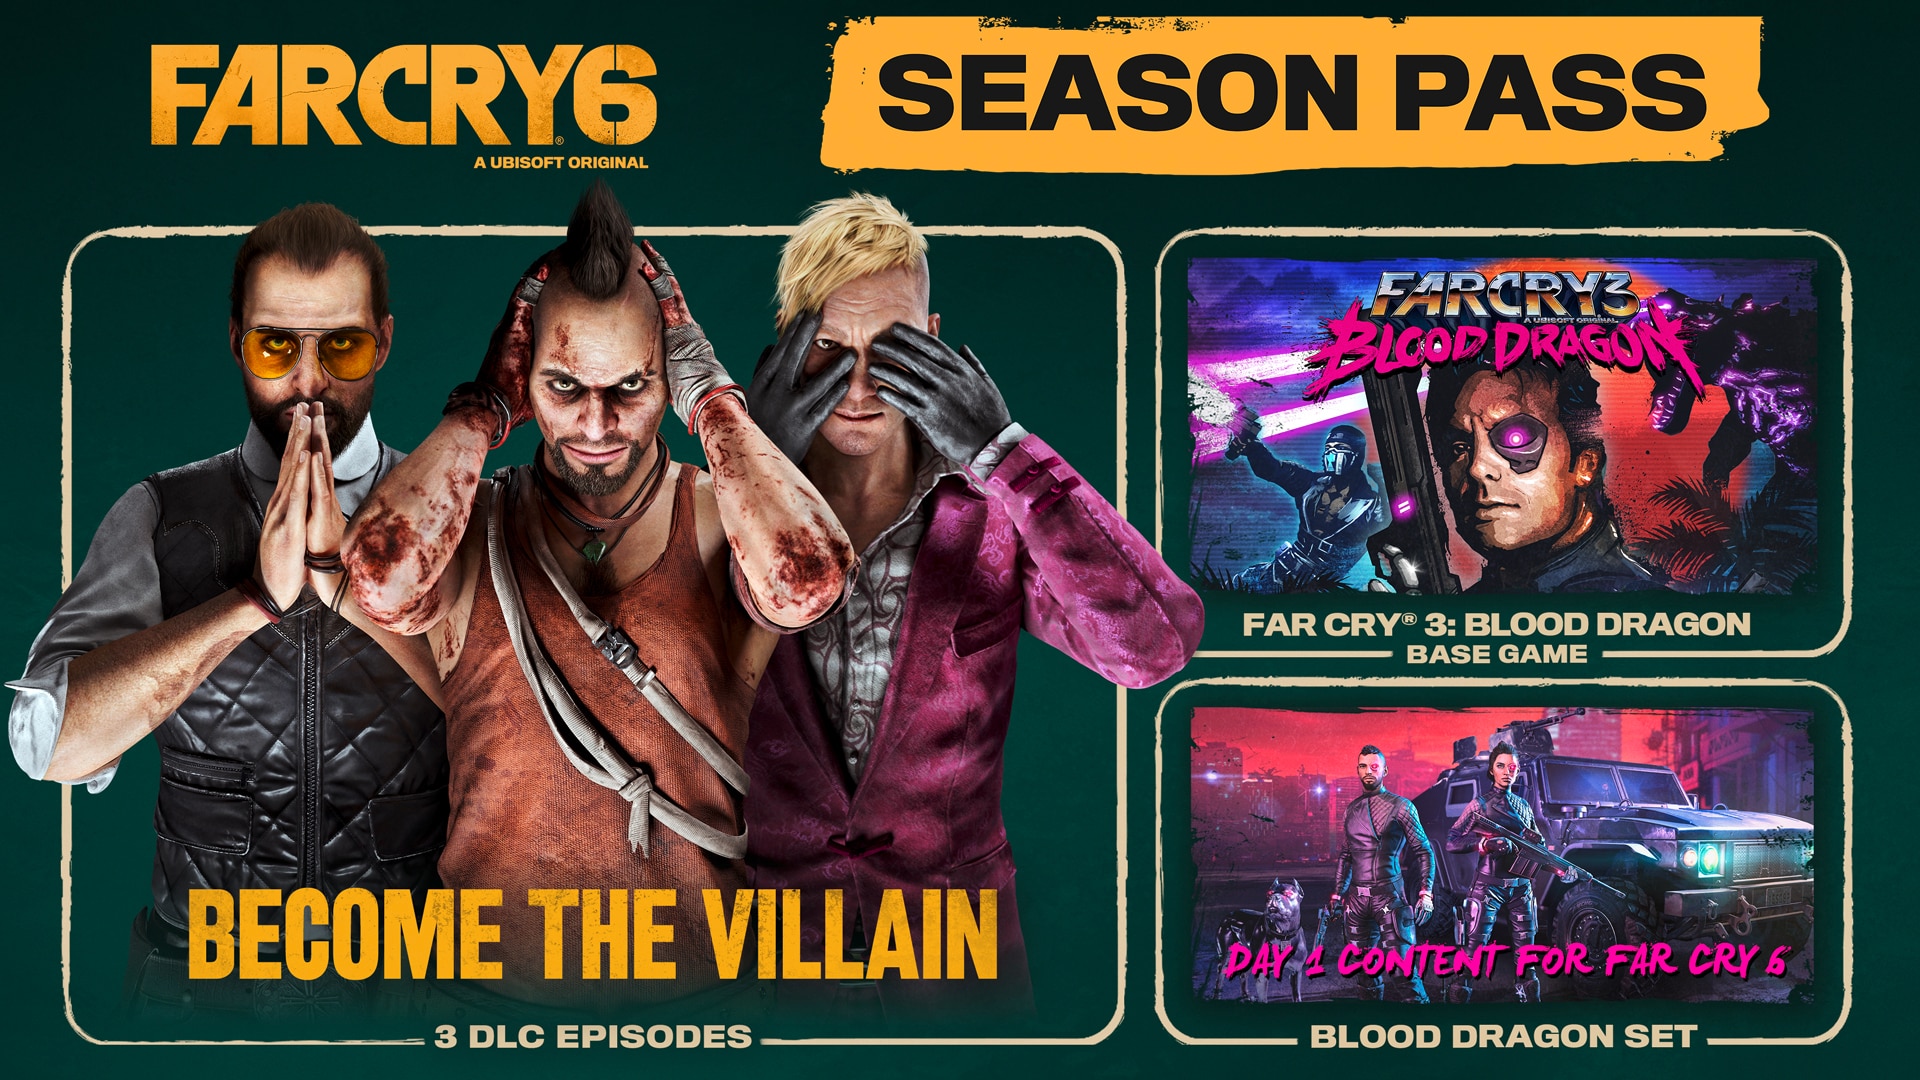 Contents of the Far Cry 6 Season Pass